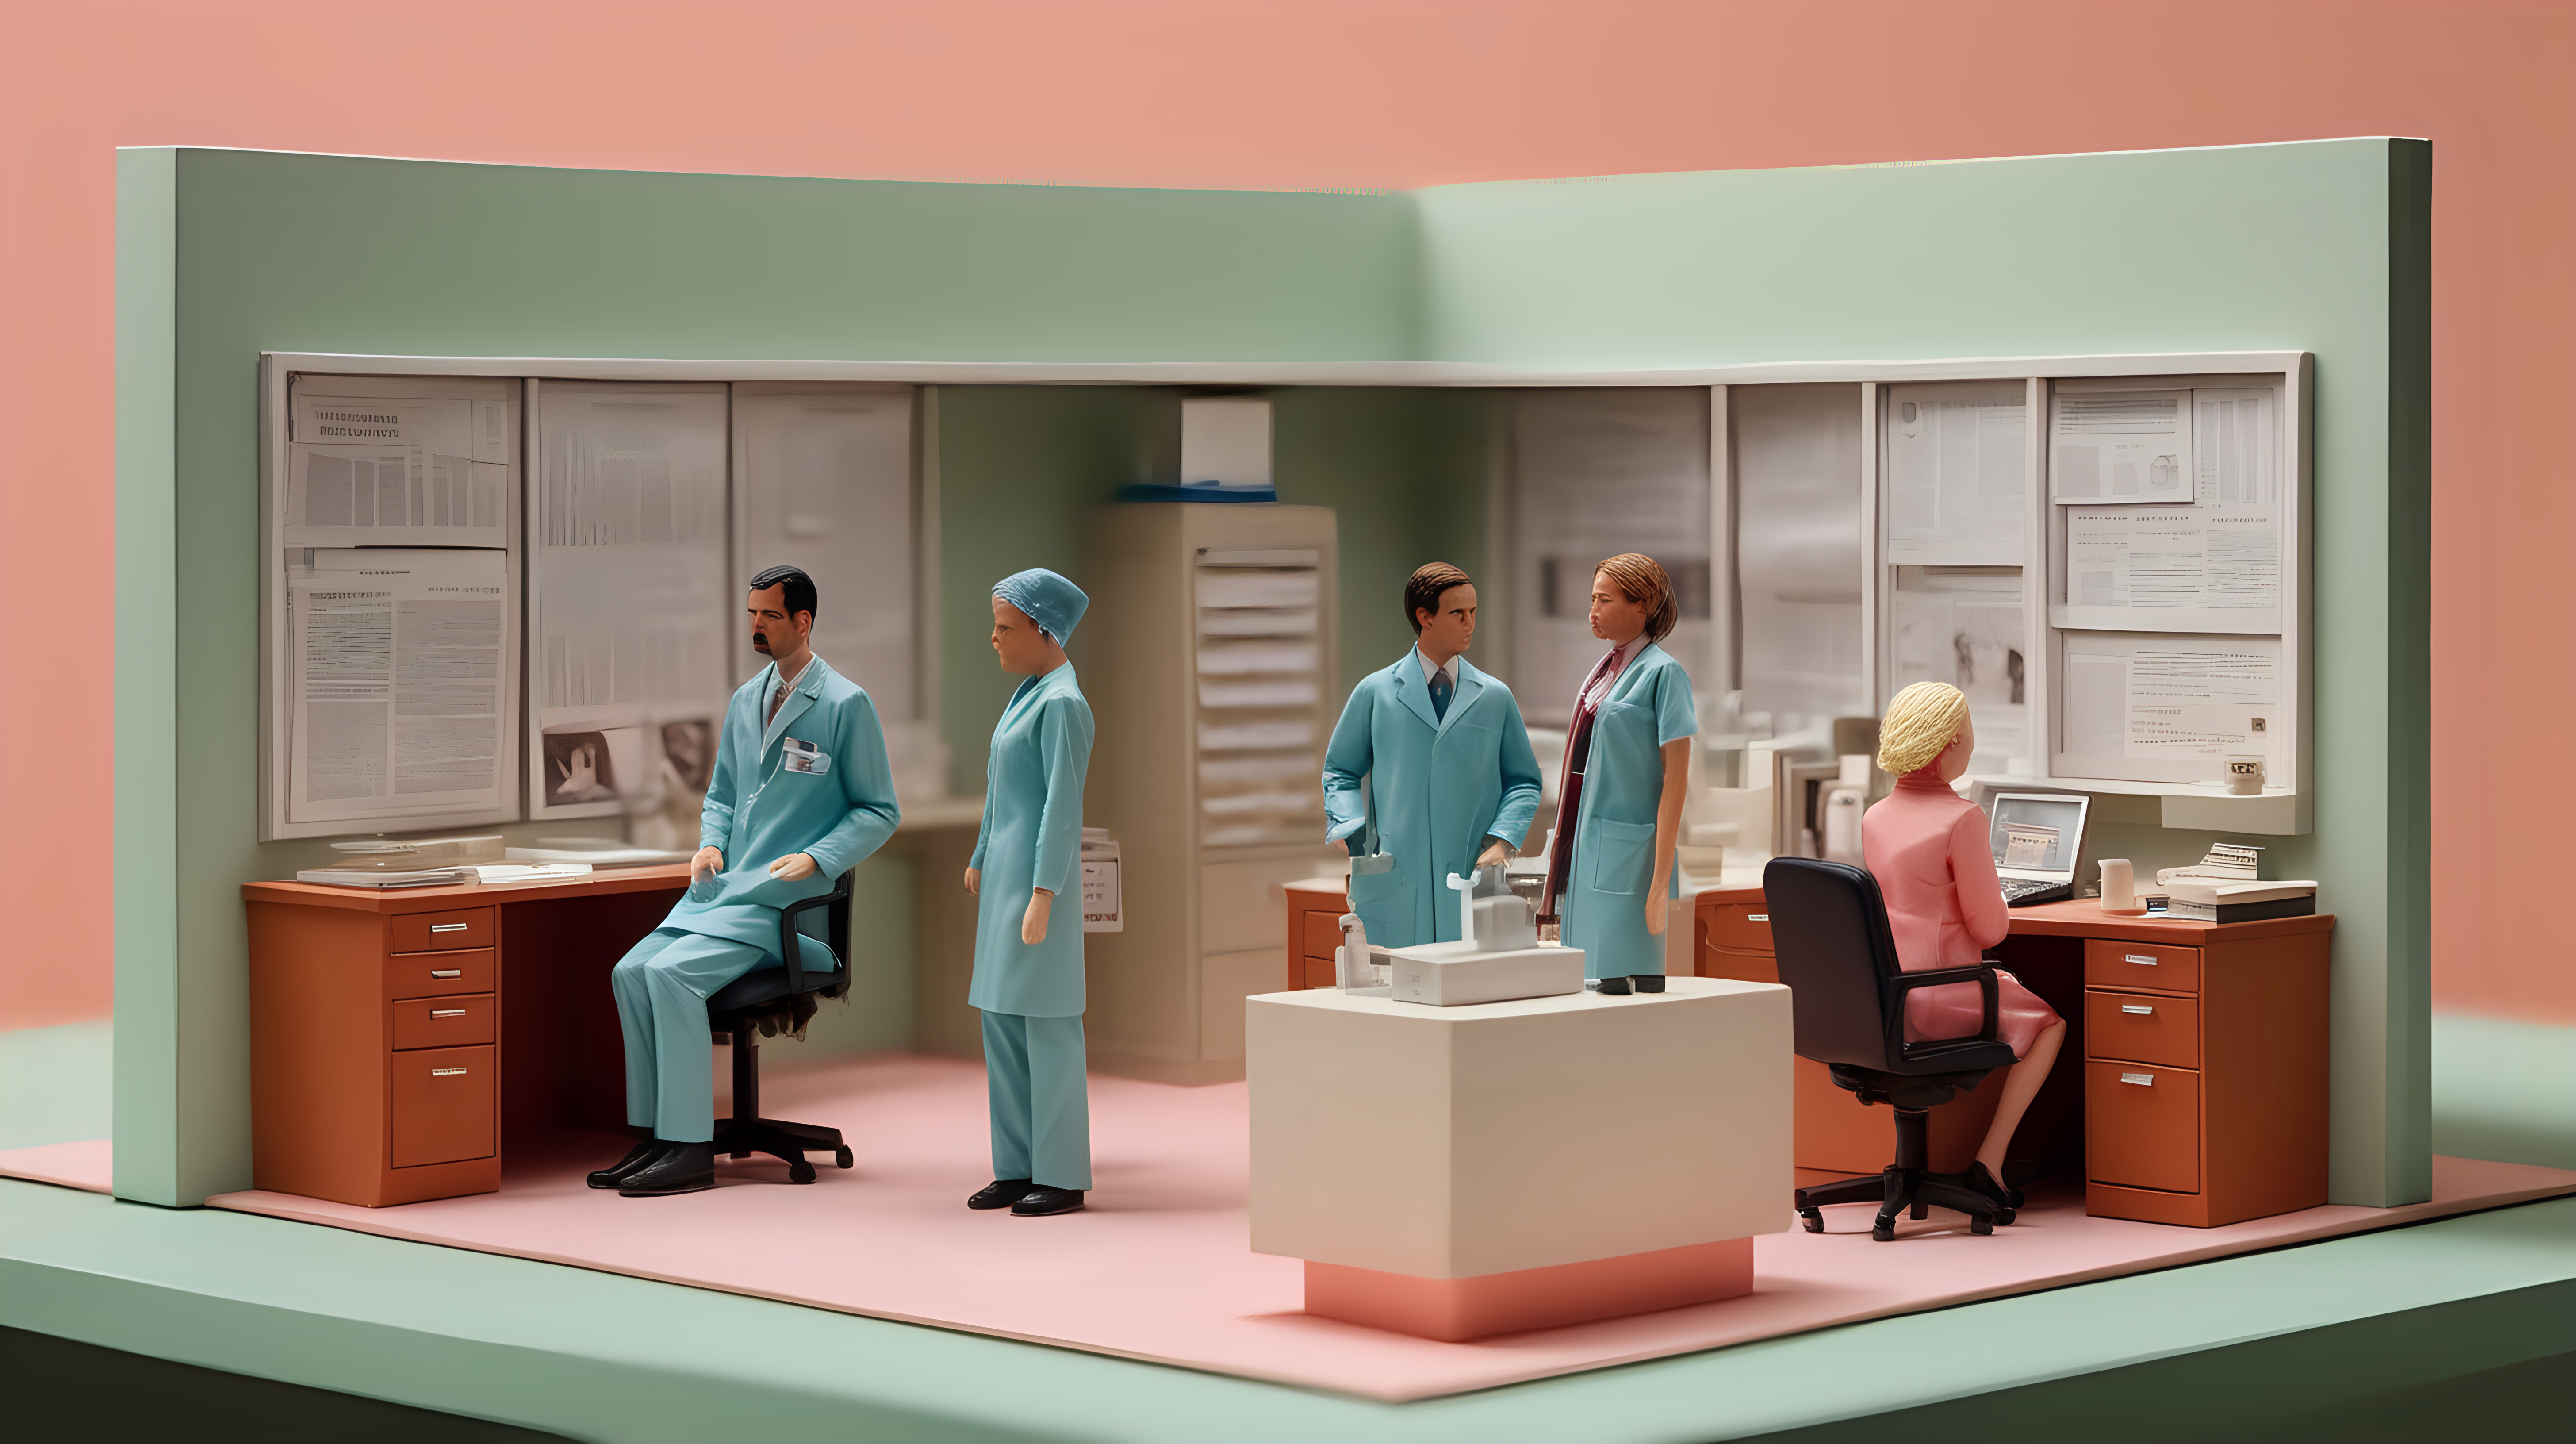 close up, high quality photograph of a diorama cross section of one floor of an office building with three offices.  One is a neurosurgeon, one is a design company, and one is a feminist periodical, all in the style of a wes anderson movie
